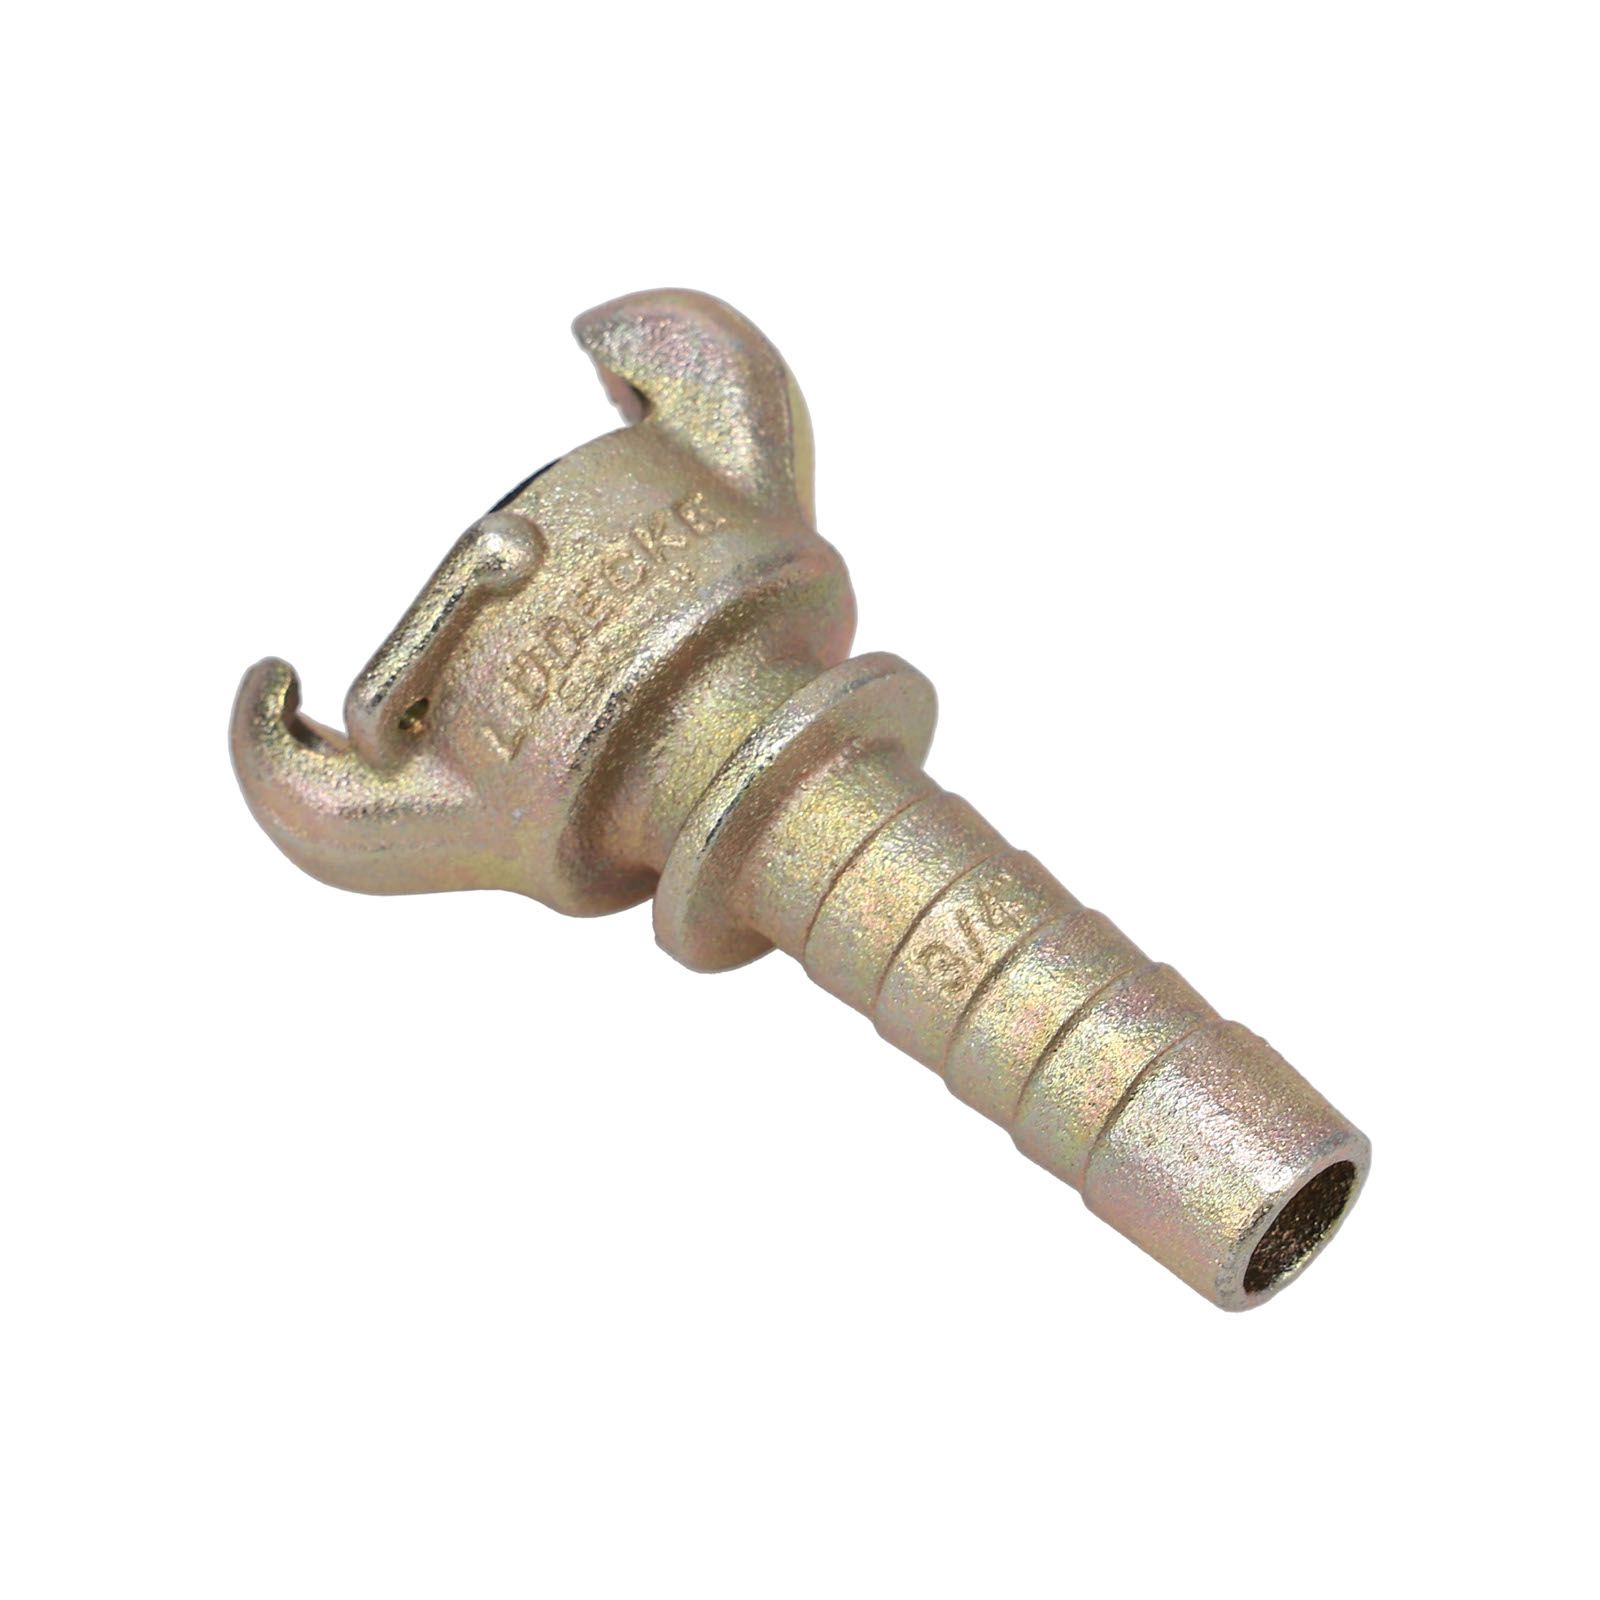 CASTED US CLAW COUPLING 3/4INCH (HN) foto de producto